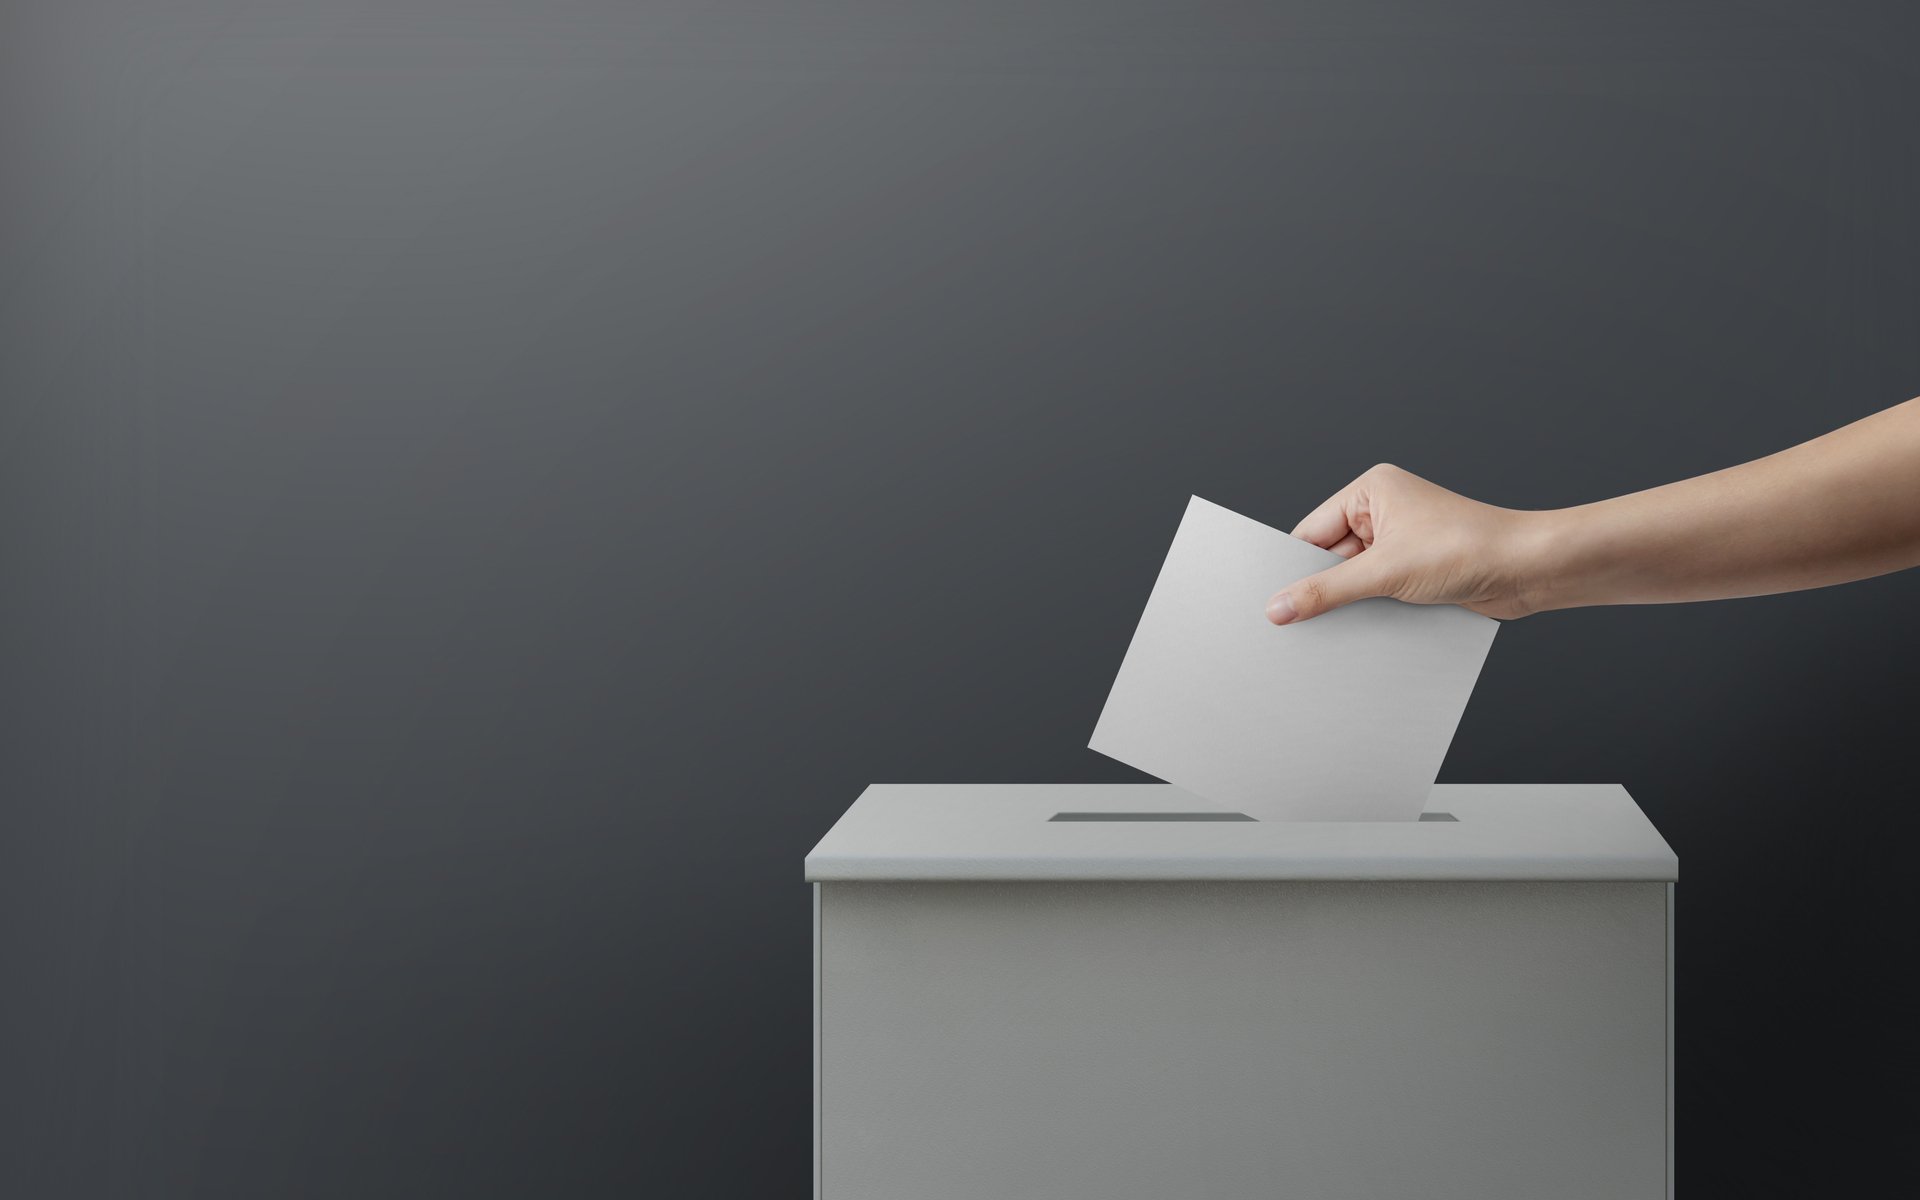 Bitfinex Enables Voting for EOS Block Producers